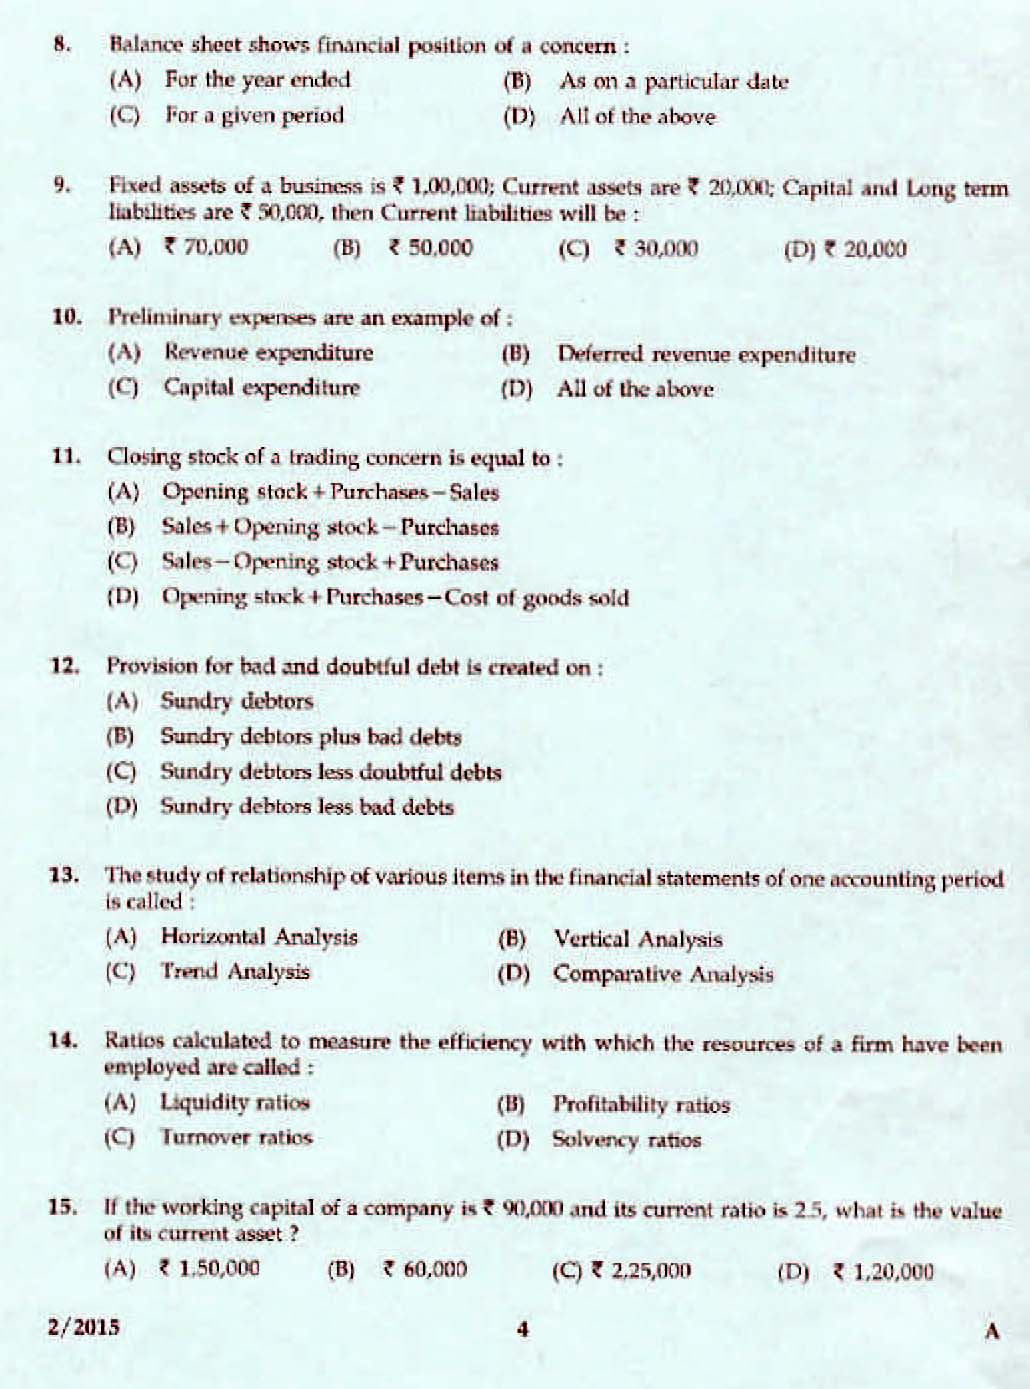 Kerala PSC Accounts Officer OMR Exam 2015 Question Paper Code 22015 2